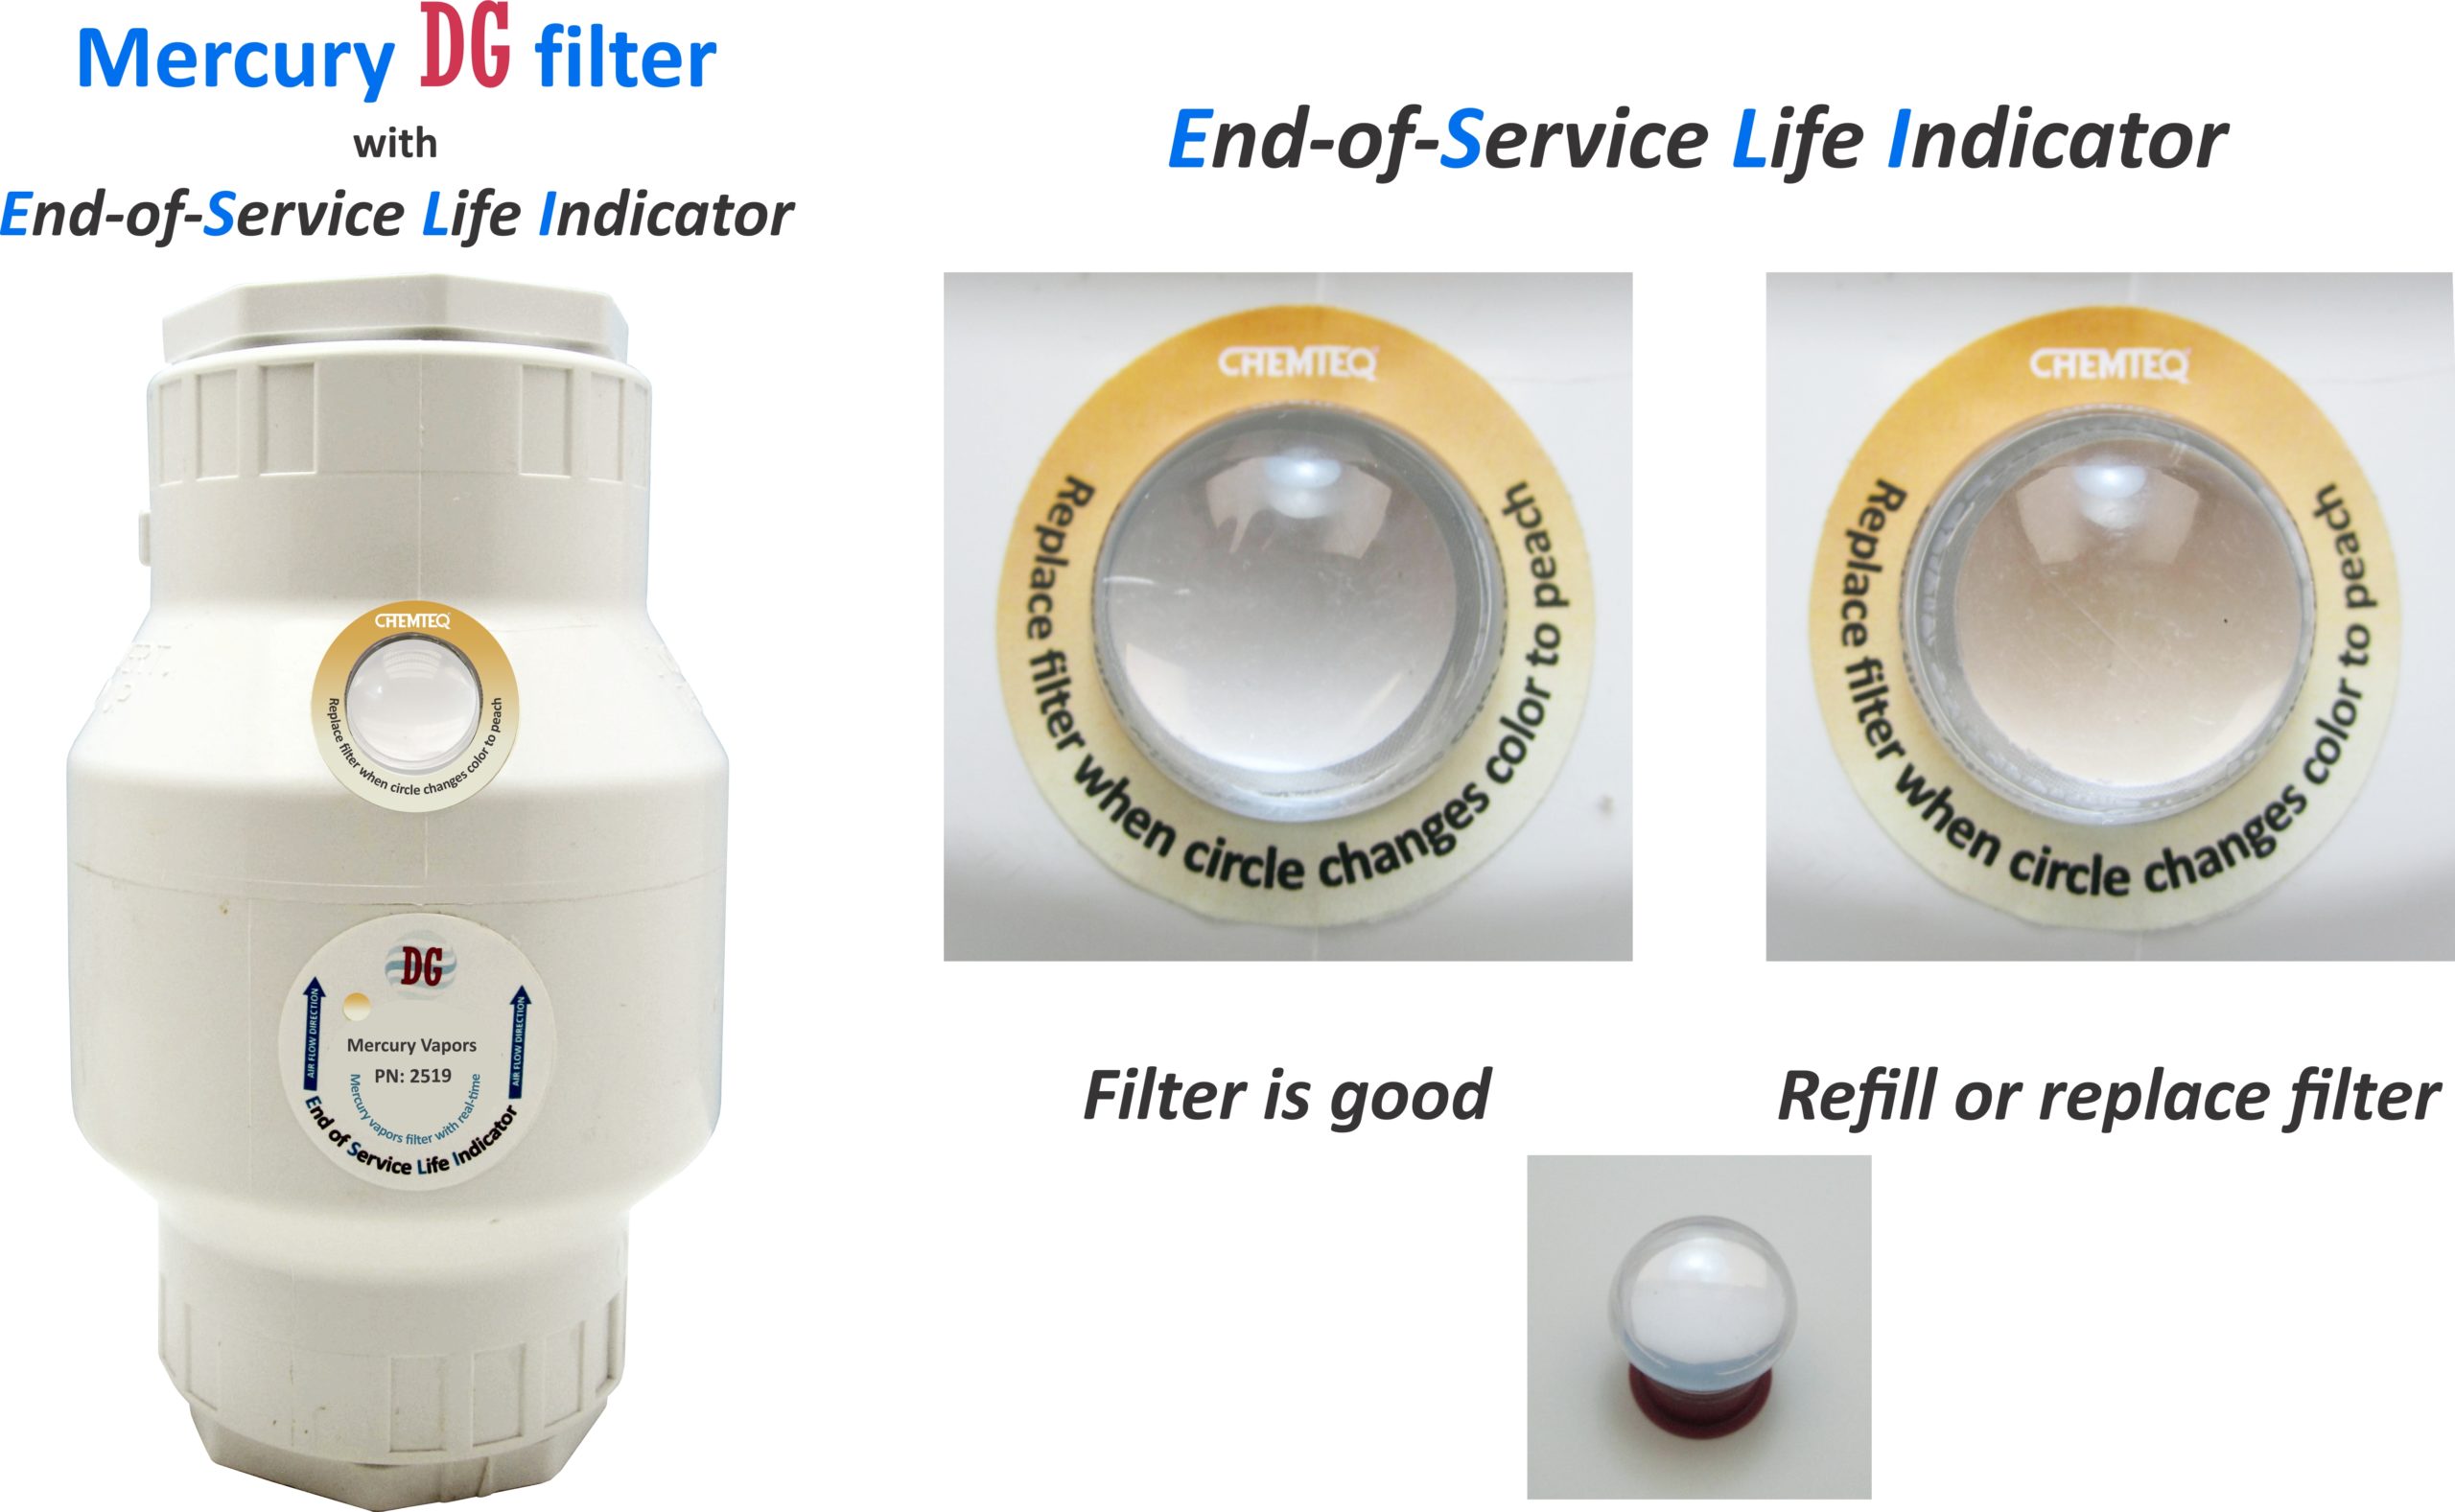 Mercury DG 2519 Filter with end-of-service life indicator